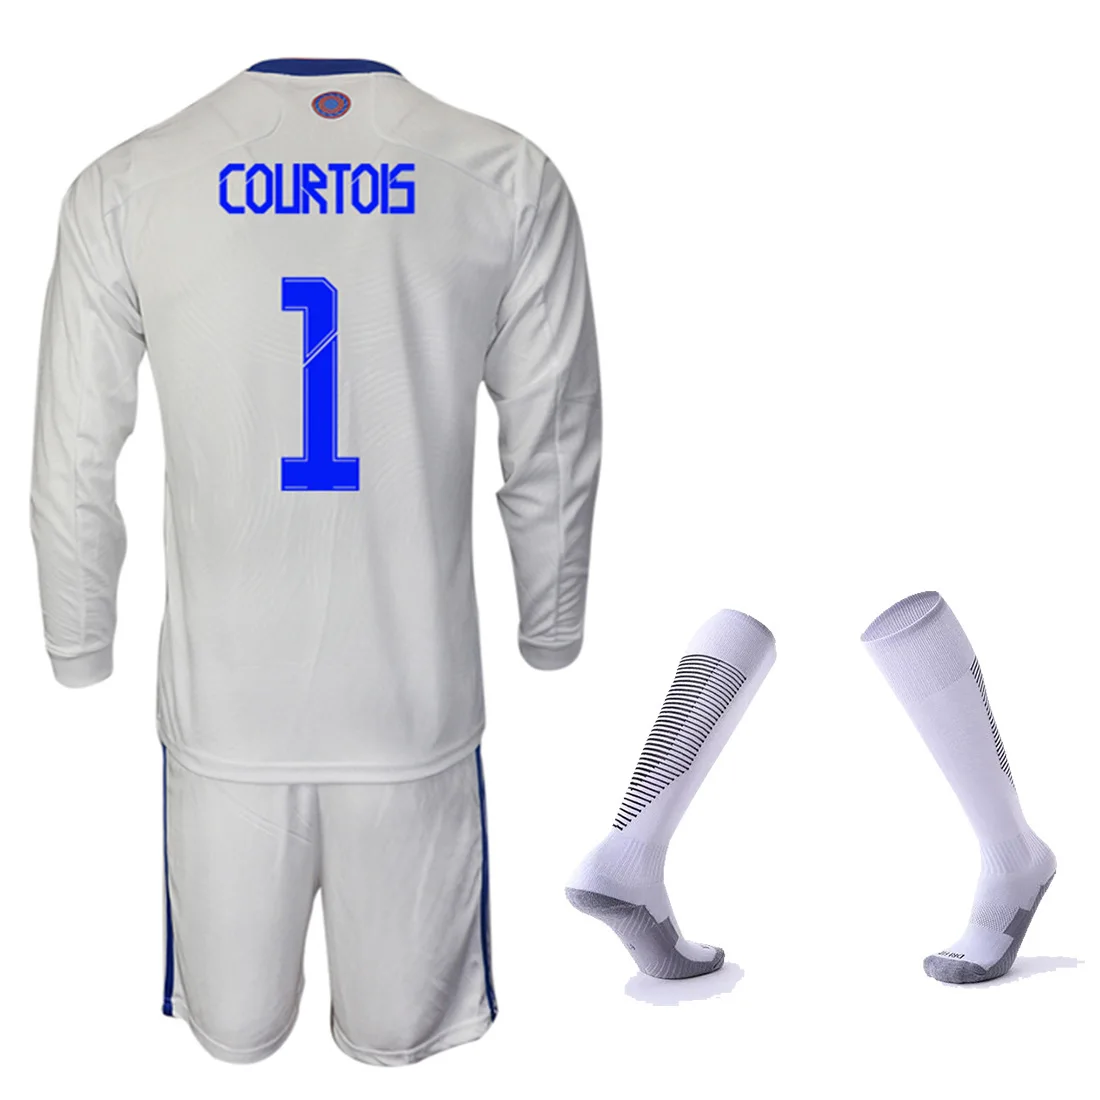 

2021-2022 Goalkeeper Home and away Football Jersey #1 COURTOIS Men's Youth Kids Training Wear T-shirt 21/22 R.M